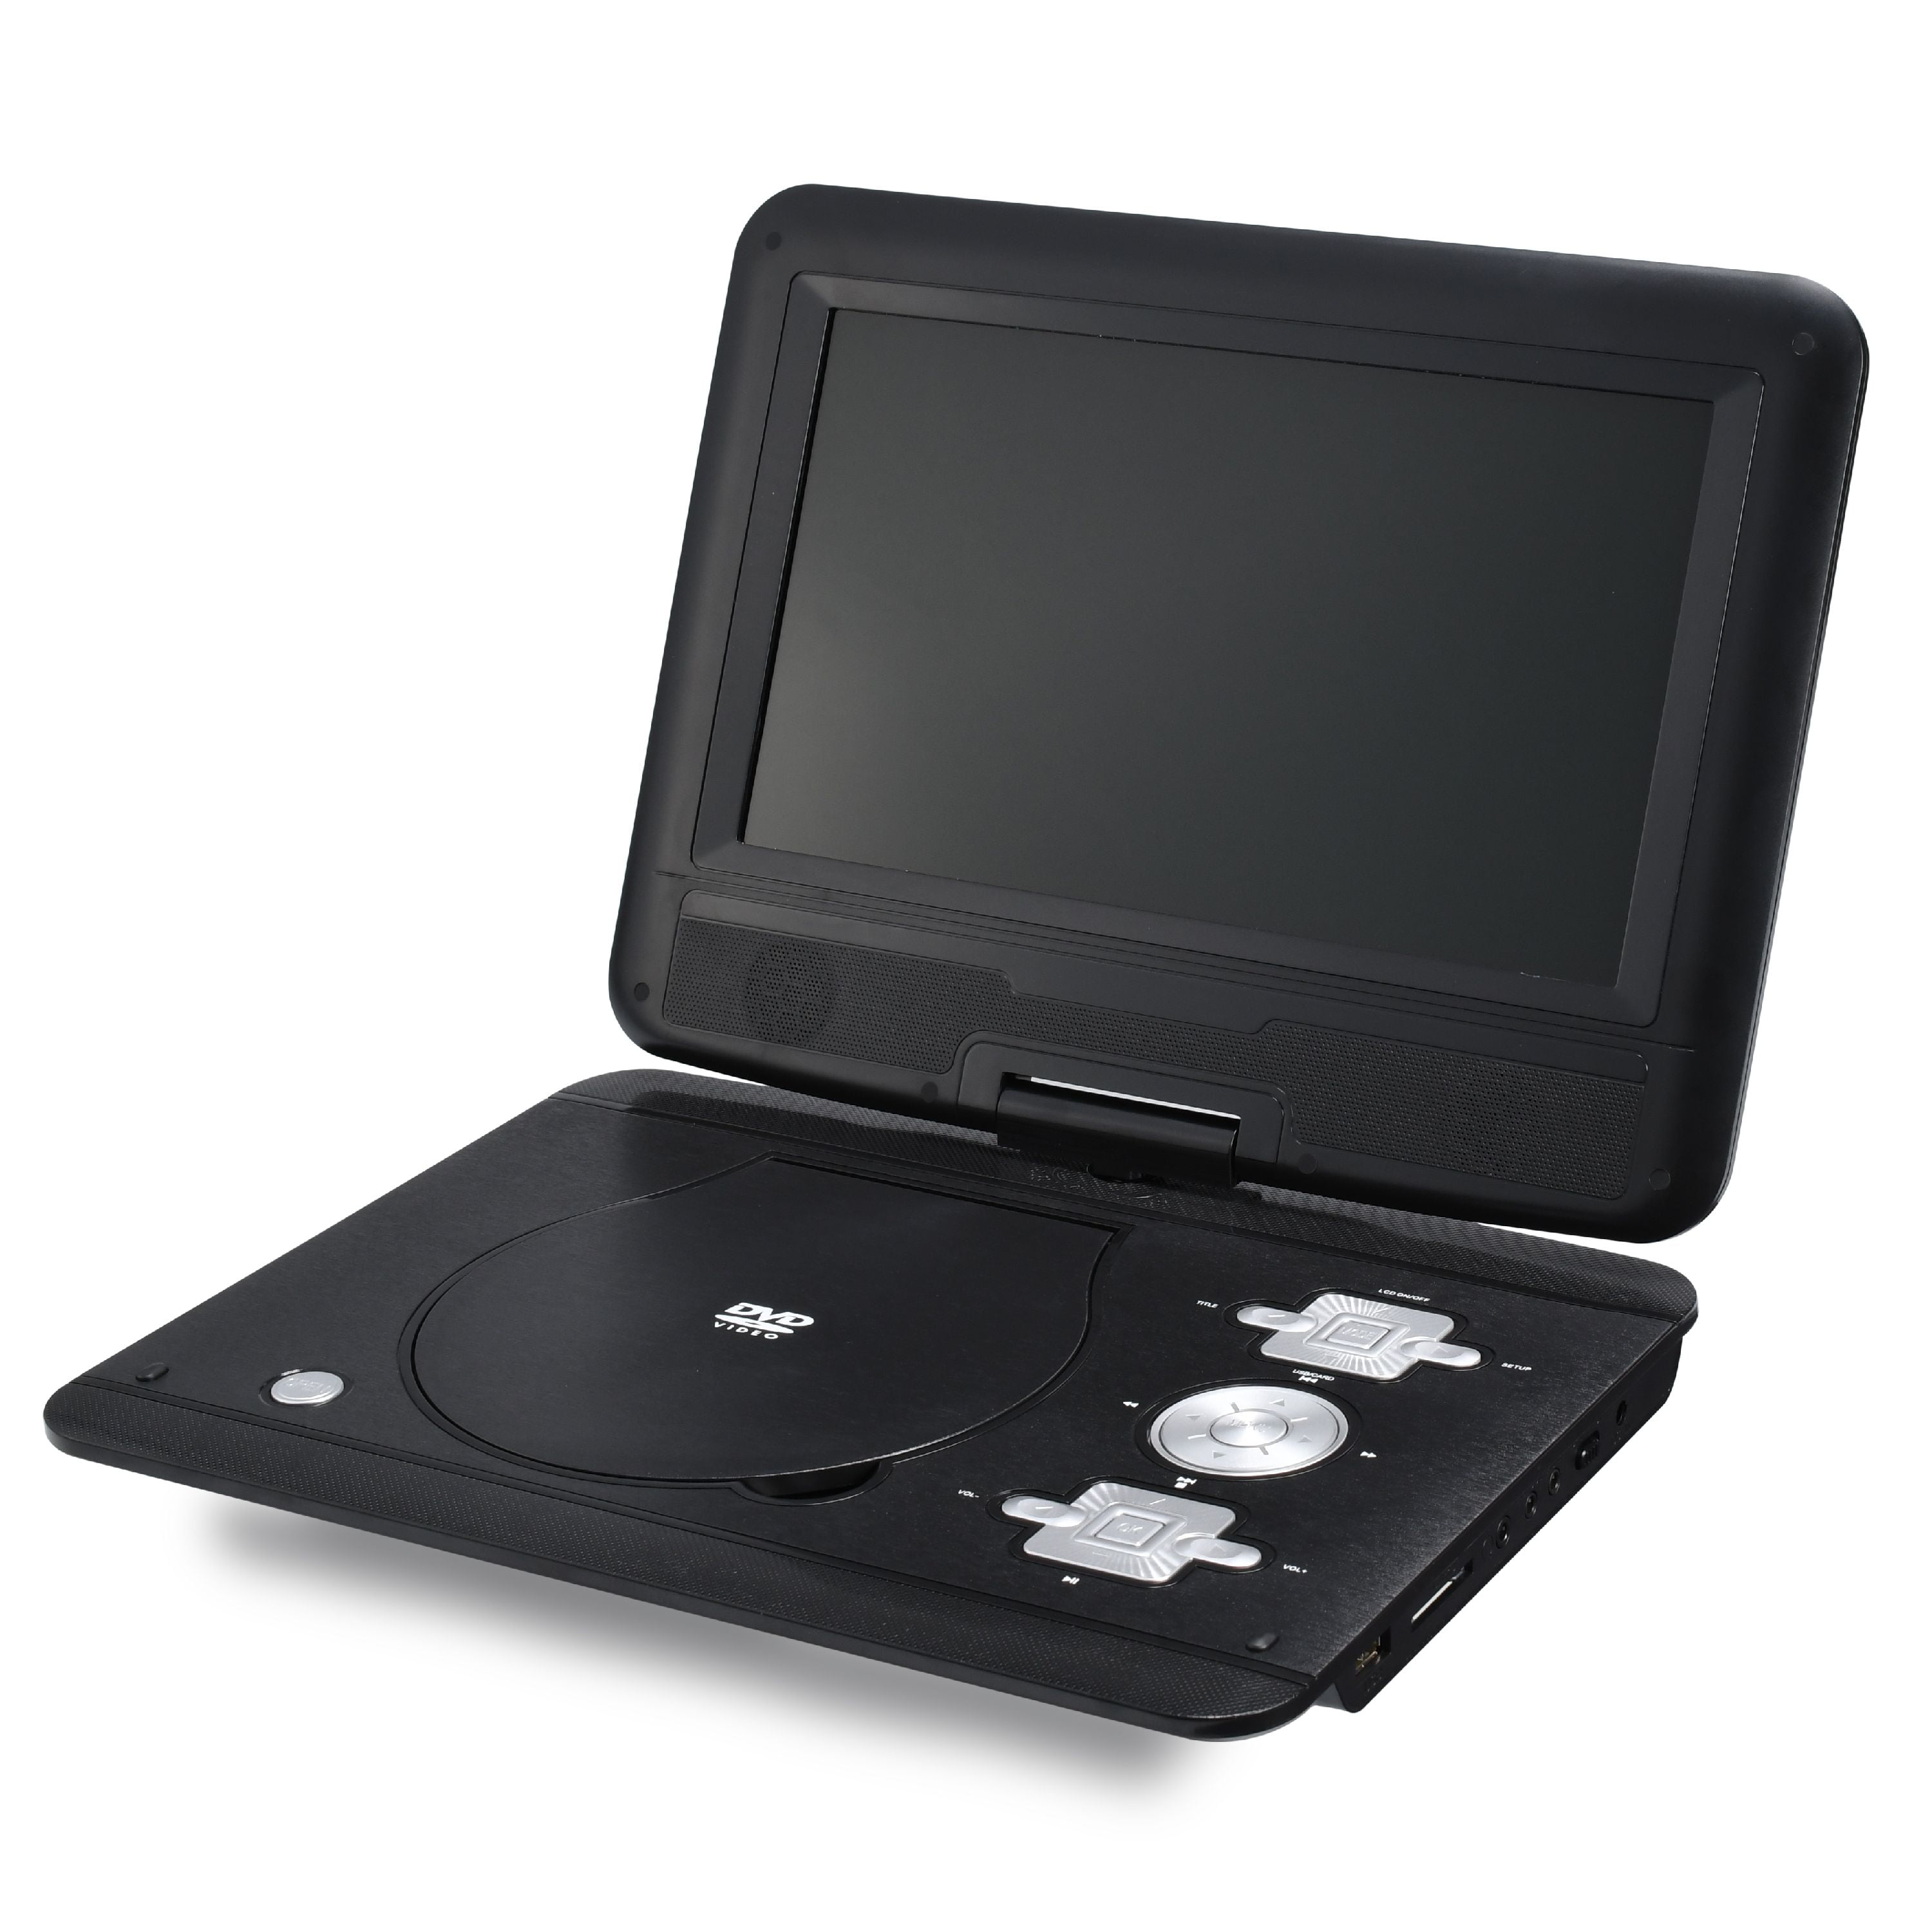 Inch portable dvd player